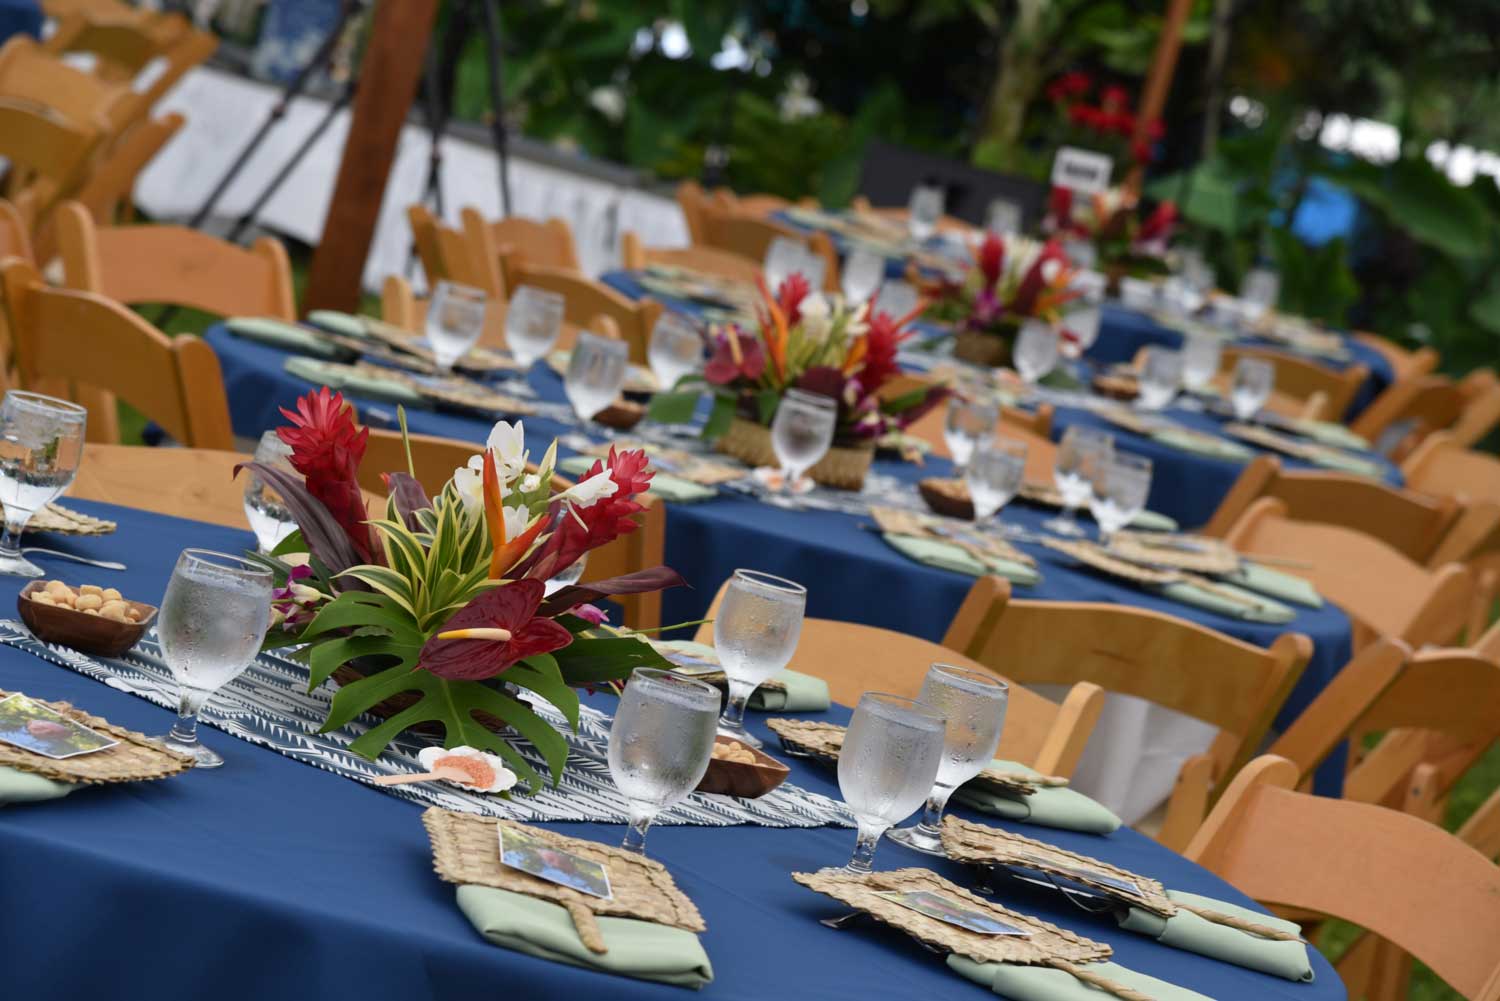 Events International is Hawaii's premiere full service event management company